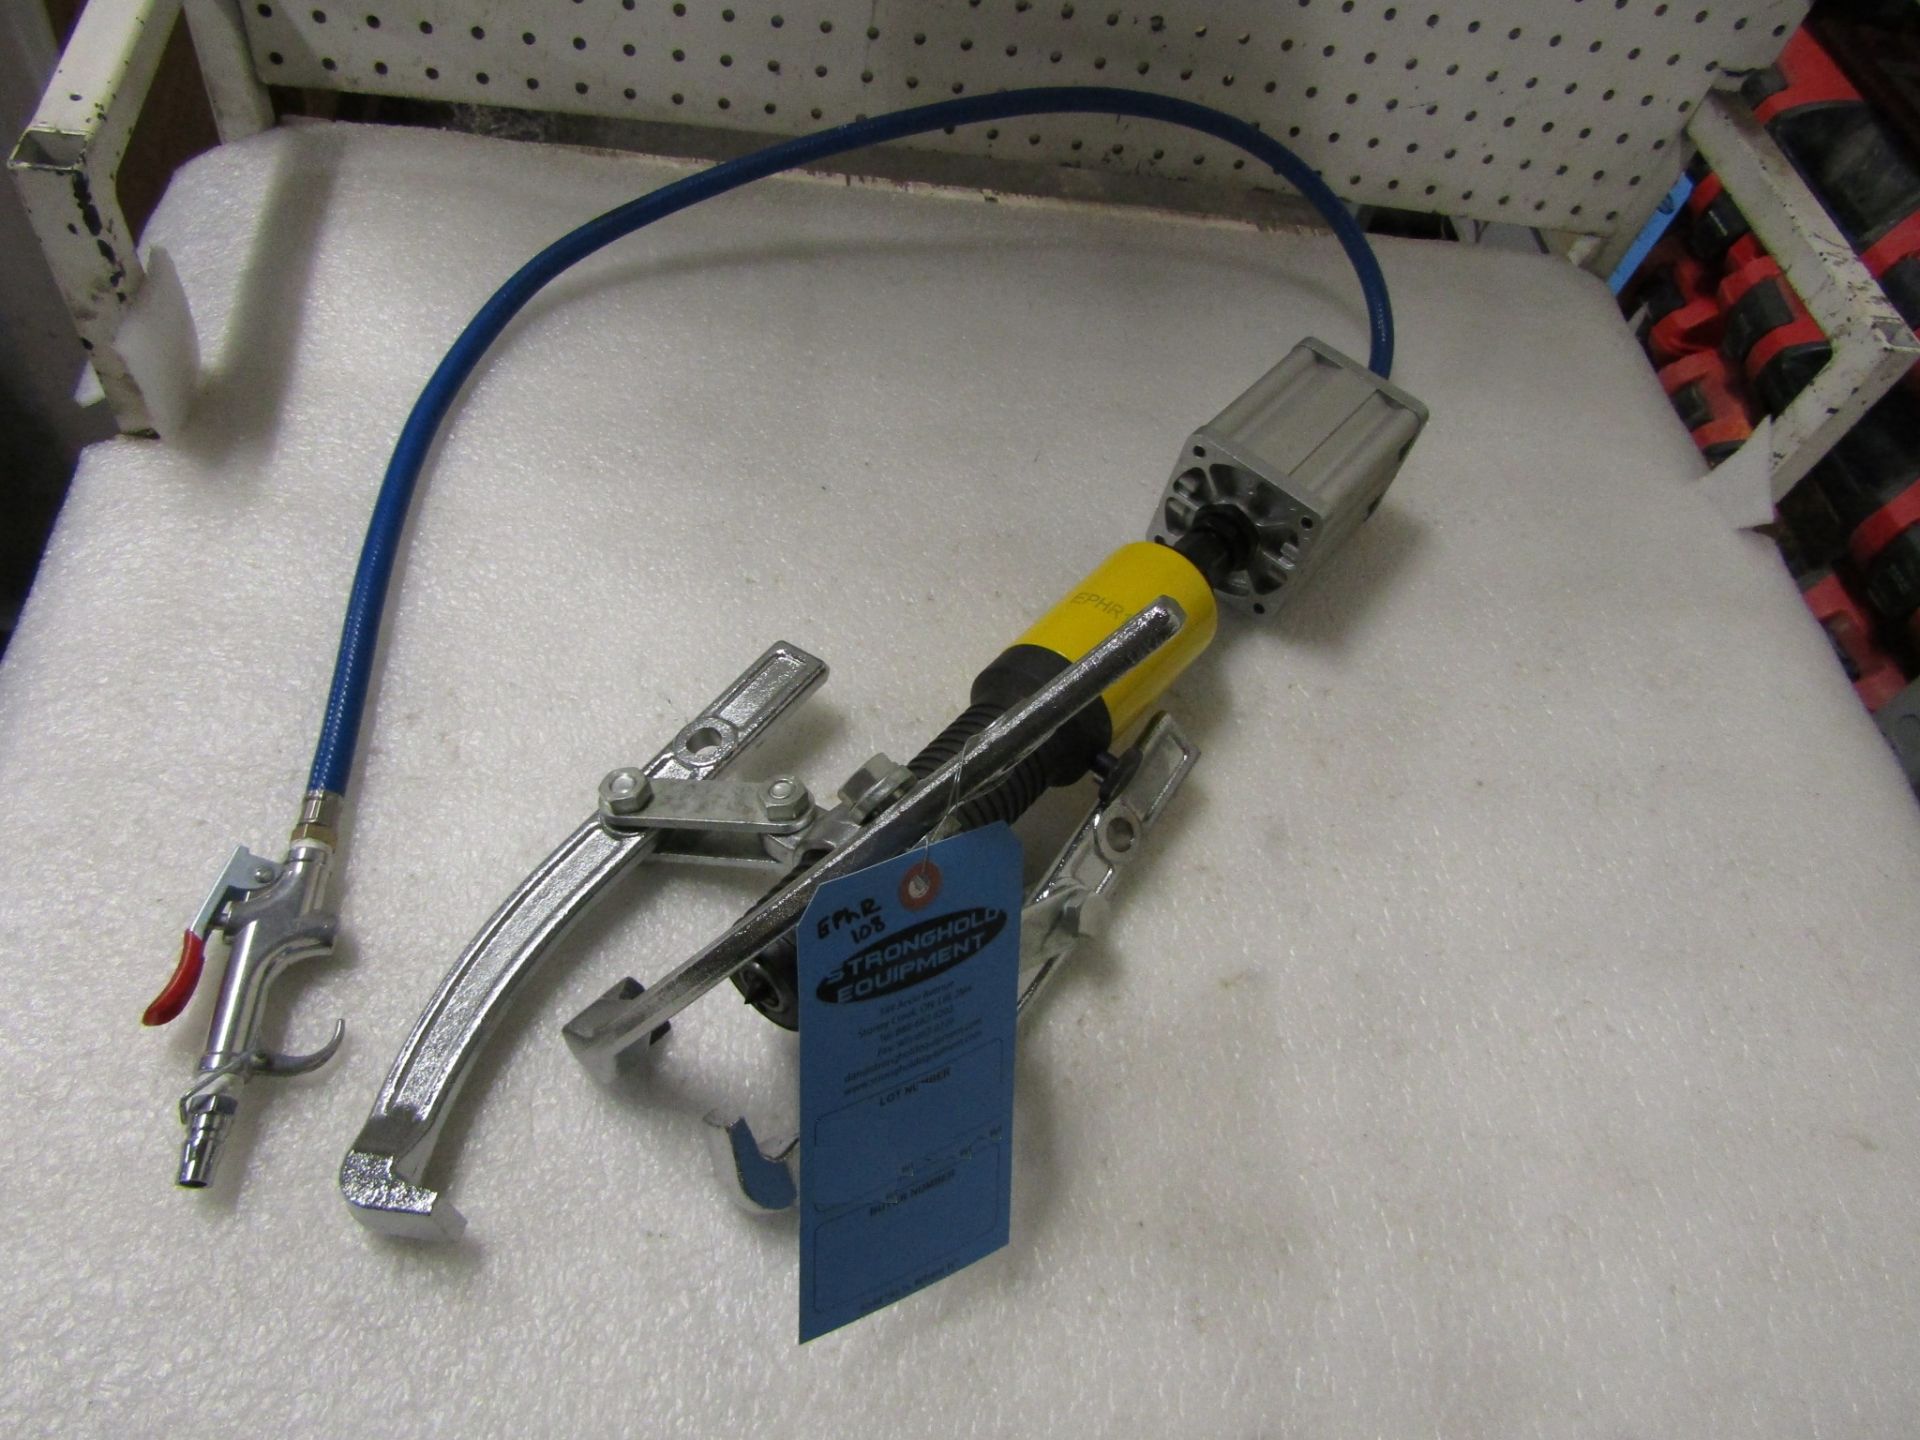 model EPHR108 Pneumatic / Air over Hydraulic Bearing Puller with 5 ton capacity MINT